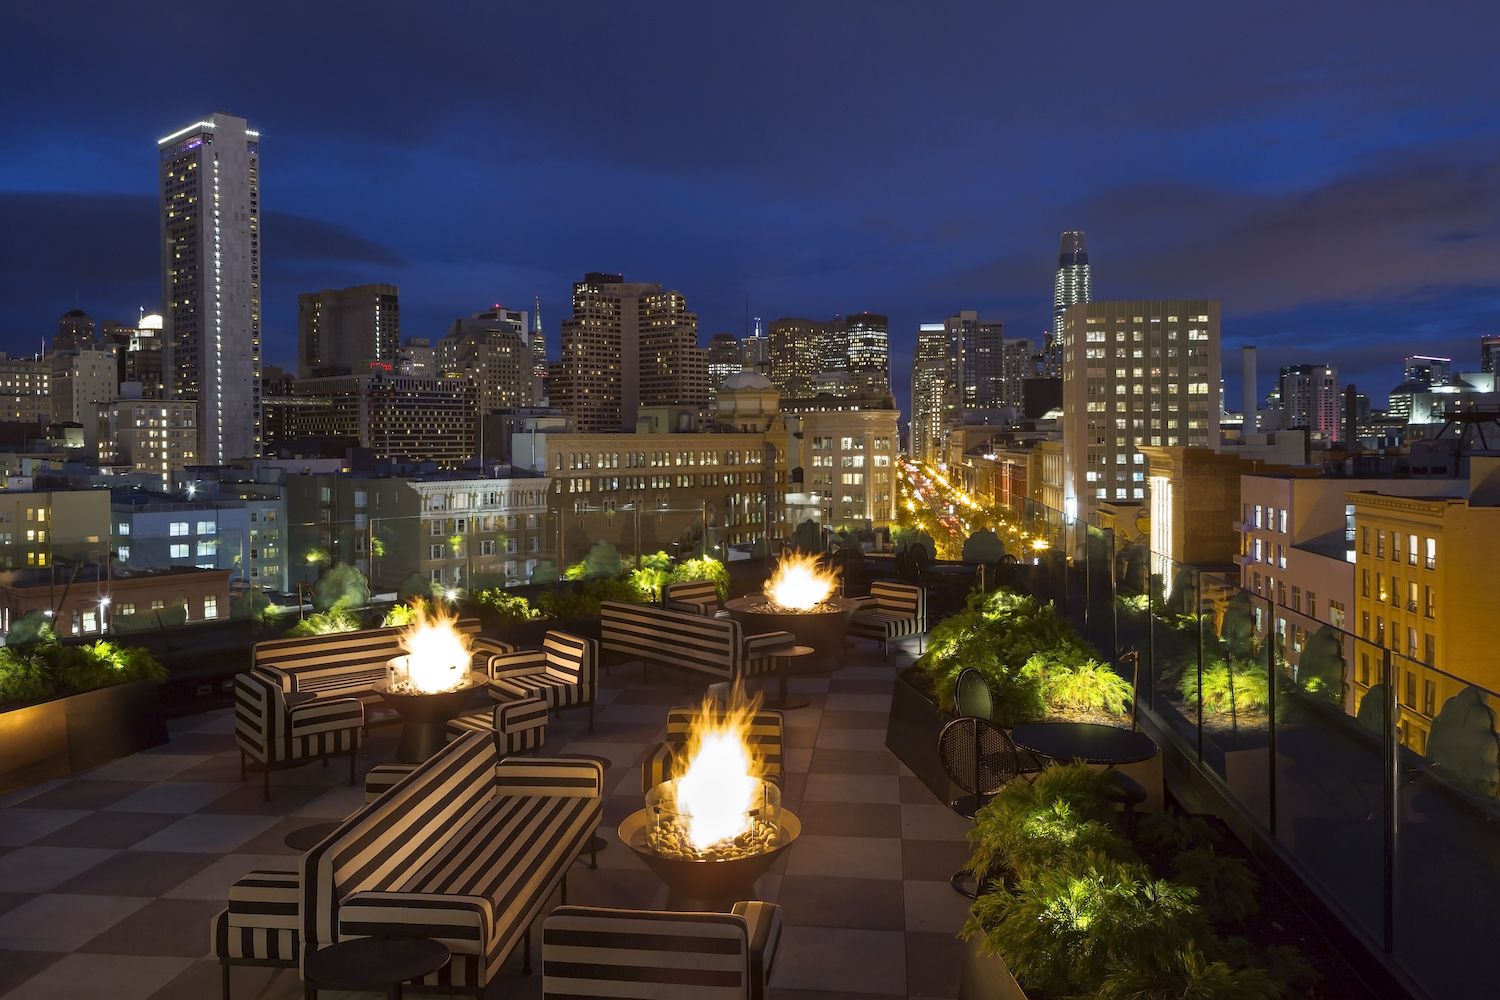 Rooftop seating area with couches, firepits, plants and view of the city